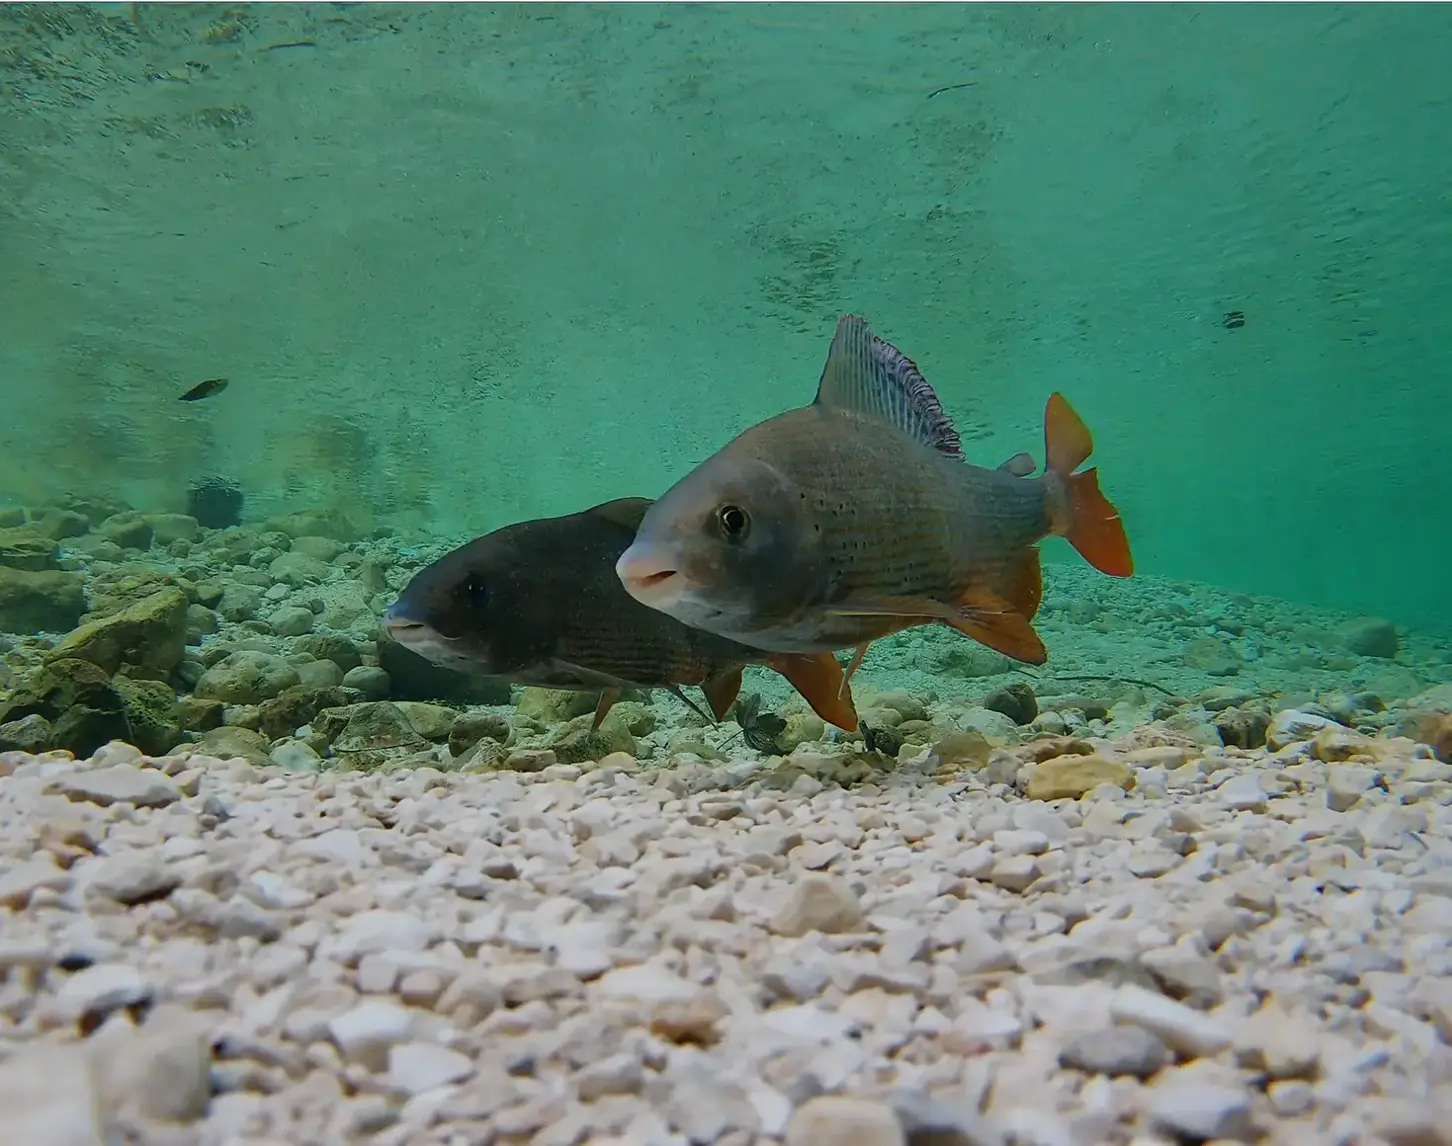 An underwater camera caught two fish on their way through the Traisen.